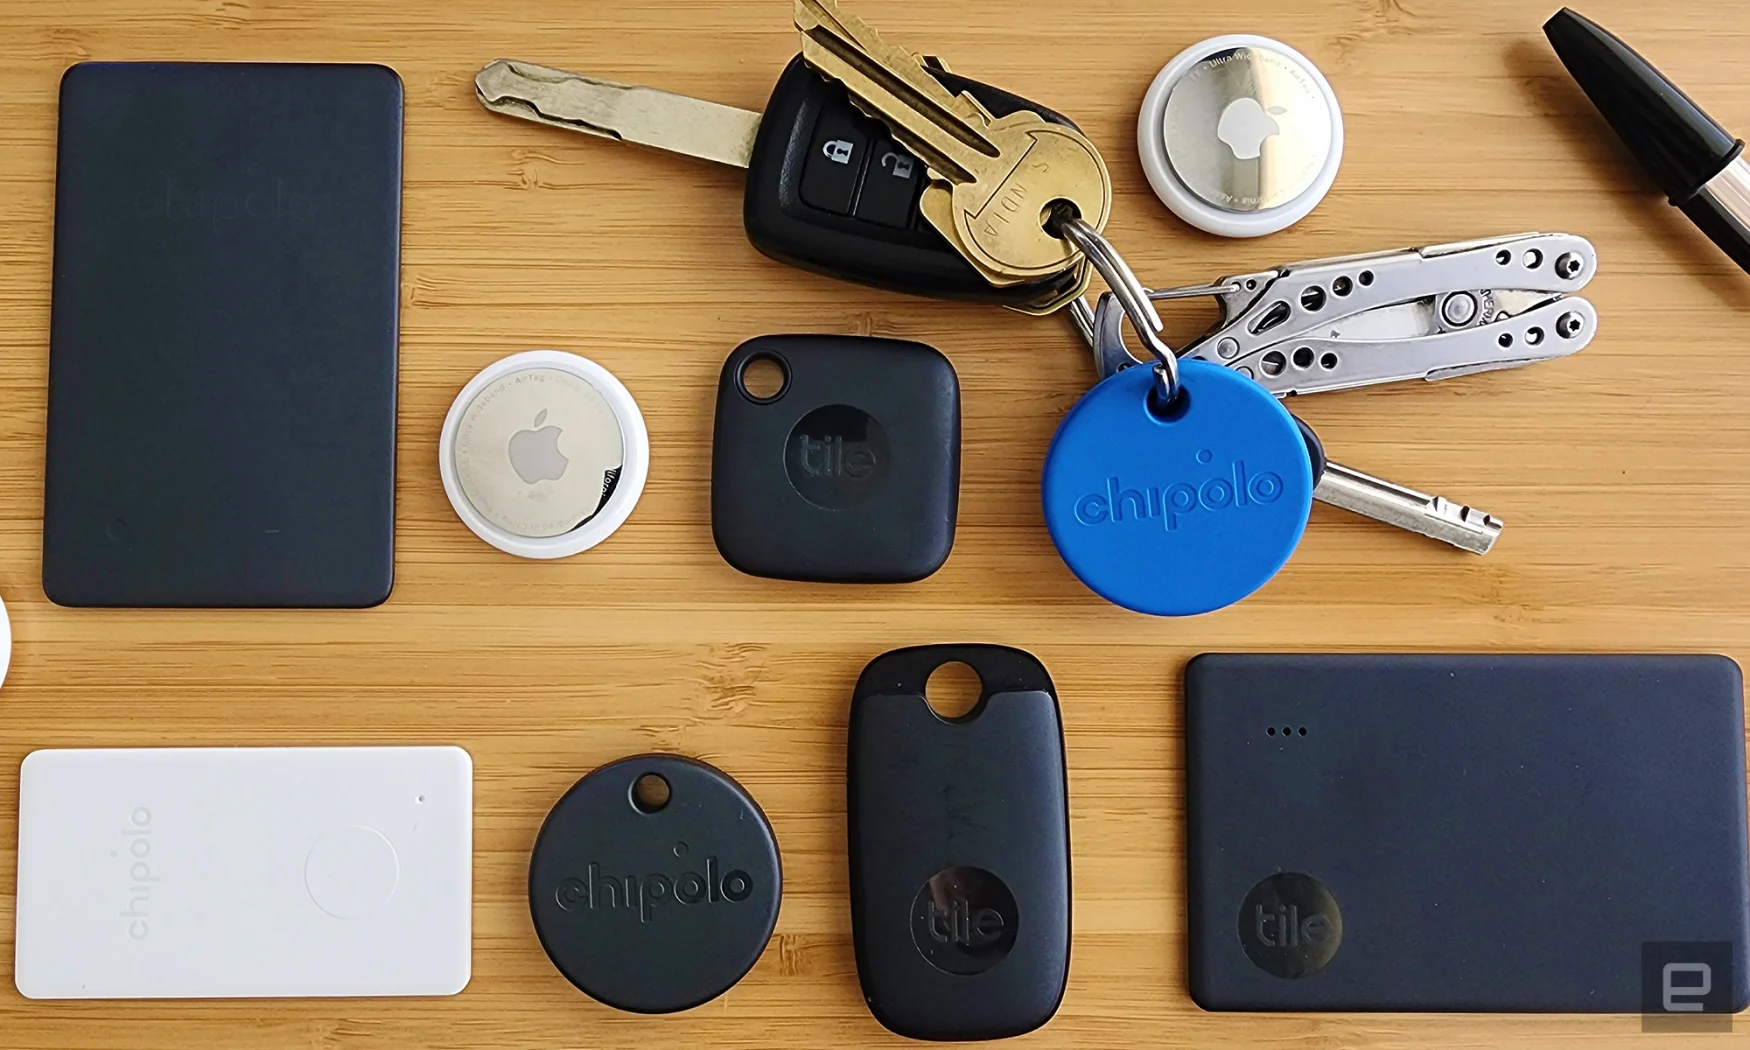 An assortment of bluetooth trackers arranged in a grid on a wooden background. Trackers include black Tile trackers in various shapes, two silver and white AirTag trackers and a round blue Chipolo tracker attached to a set of keys with a multitool key chain. 